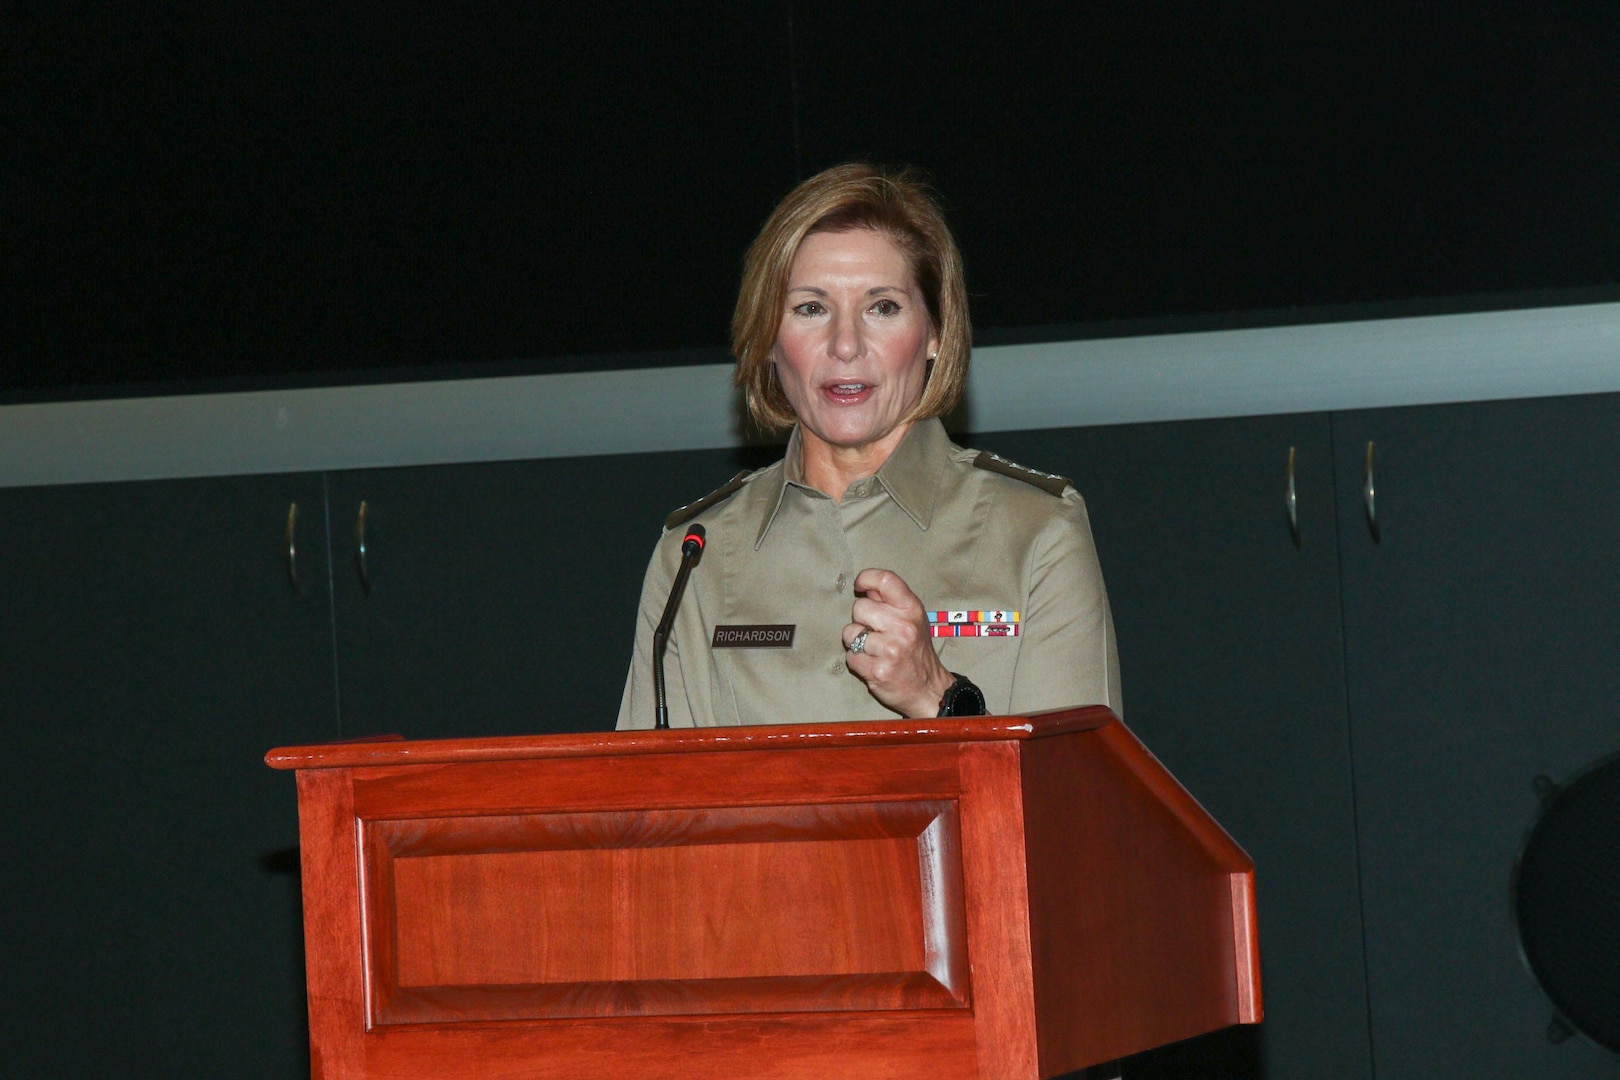 The commander of U.S. Southern Command, Army Gen. Laura Richardson, gives opening remarks at a ceremony commemorating the 25th anniversary of the command’s Human Rights Initiative (HRI).